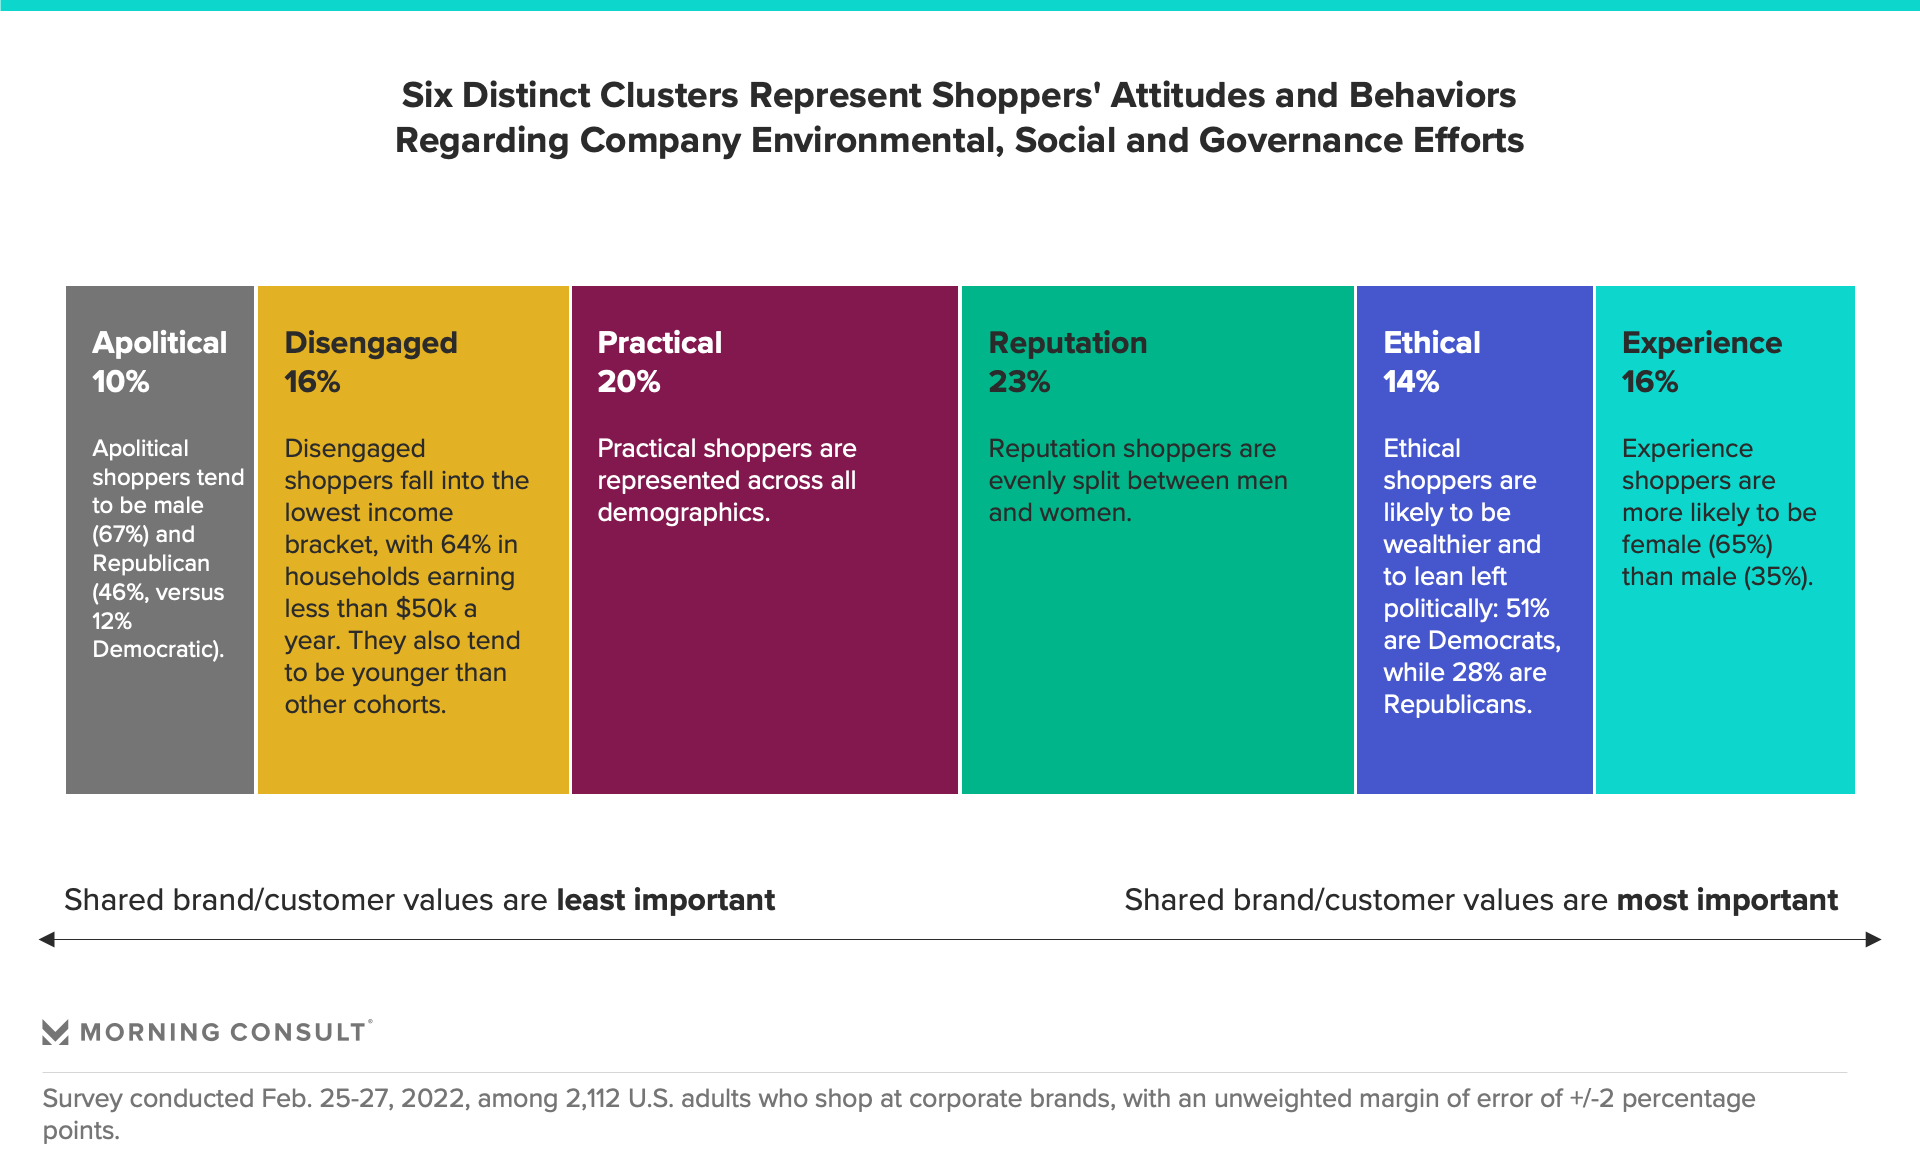 Graph displaying 6 clusters representing shoppers' attitudes and behaviors regarding company ESG efforts